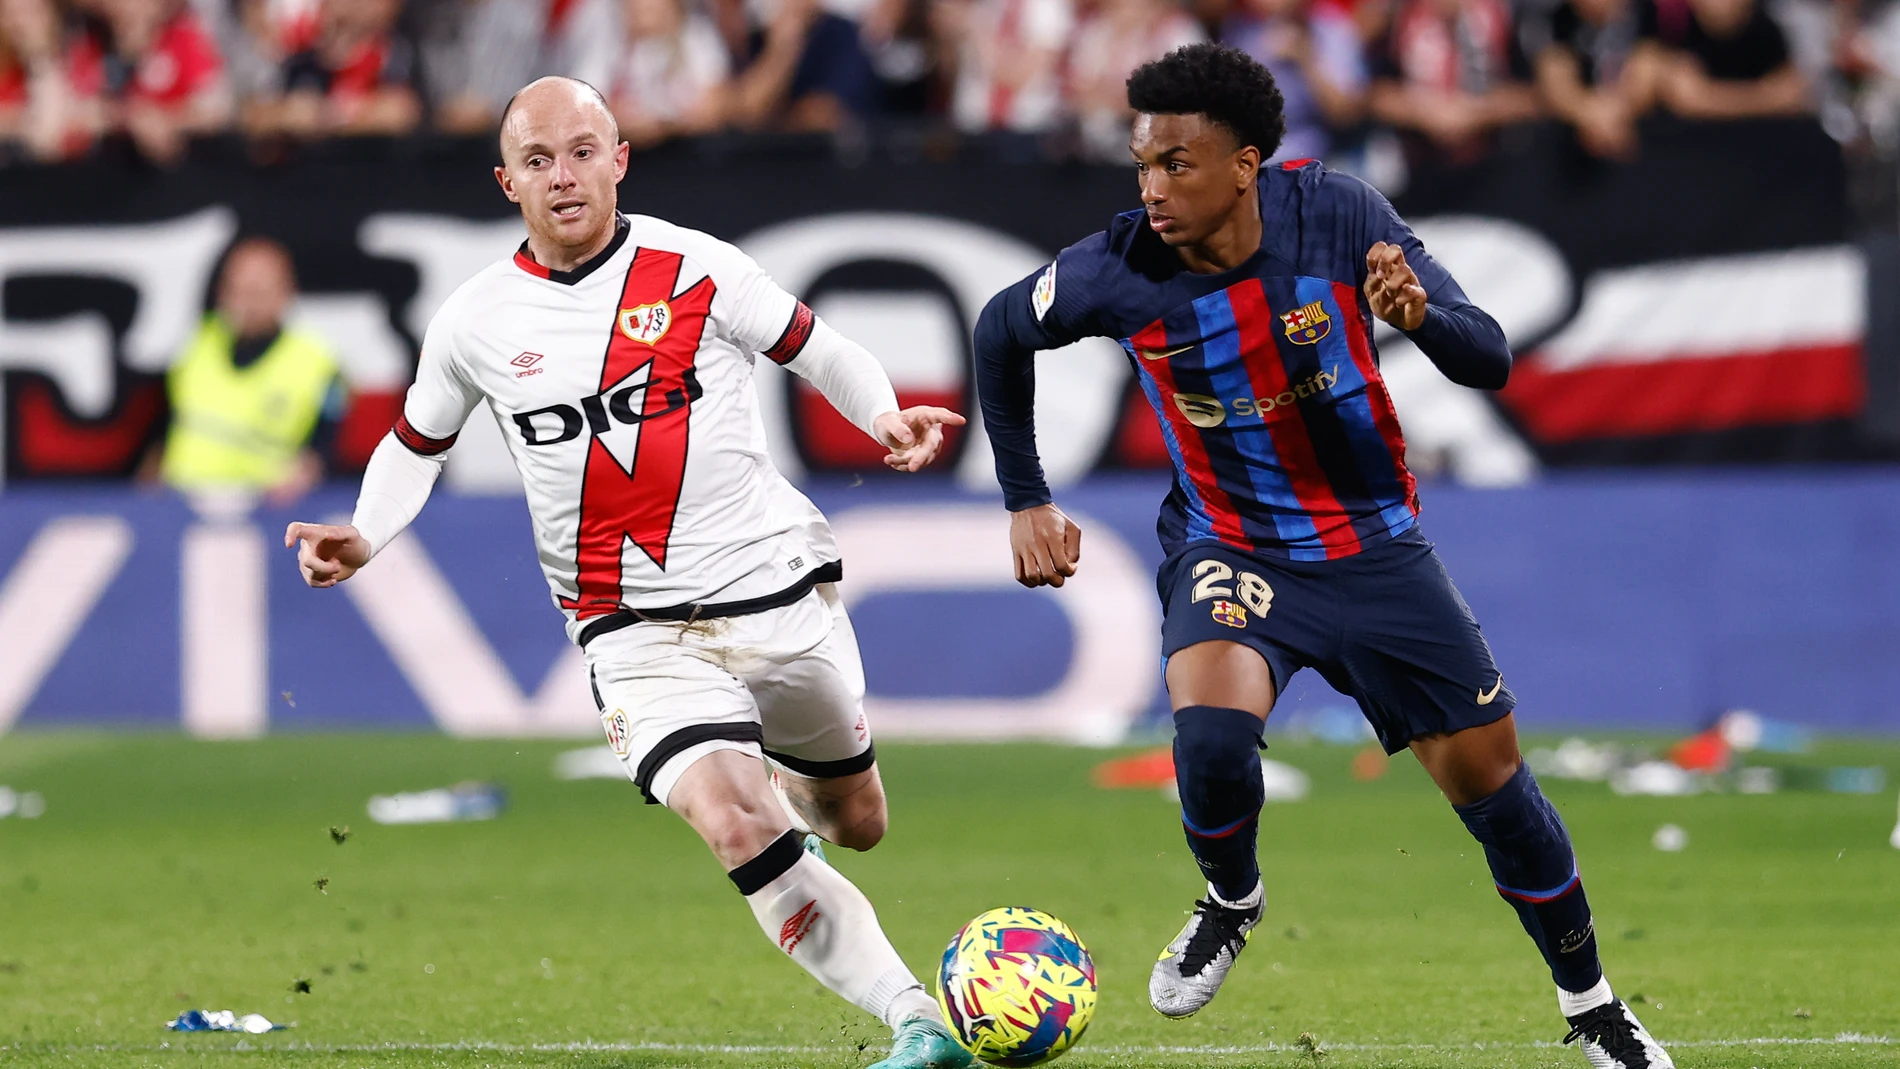 Alejandro Balde of FC Barcelona in action during the spanish league, La Liga Santander, football match played between Rayo Vallecano and FC Barcelona at Estadio de Vallecas on April 26, 2023, in Madrid, Spain. Oscar J. Barroso / Afp7 26/04/2023 ONLY FOR USE IN SPAIN